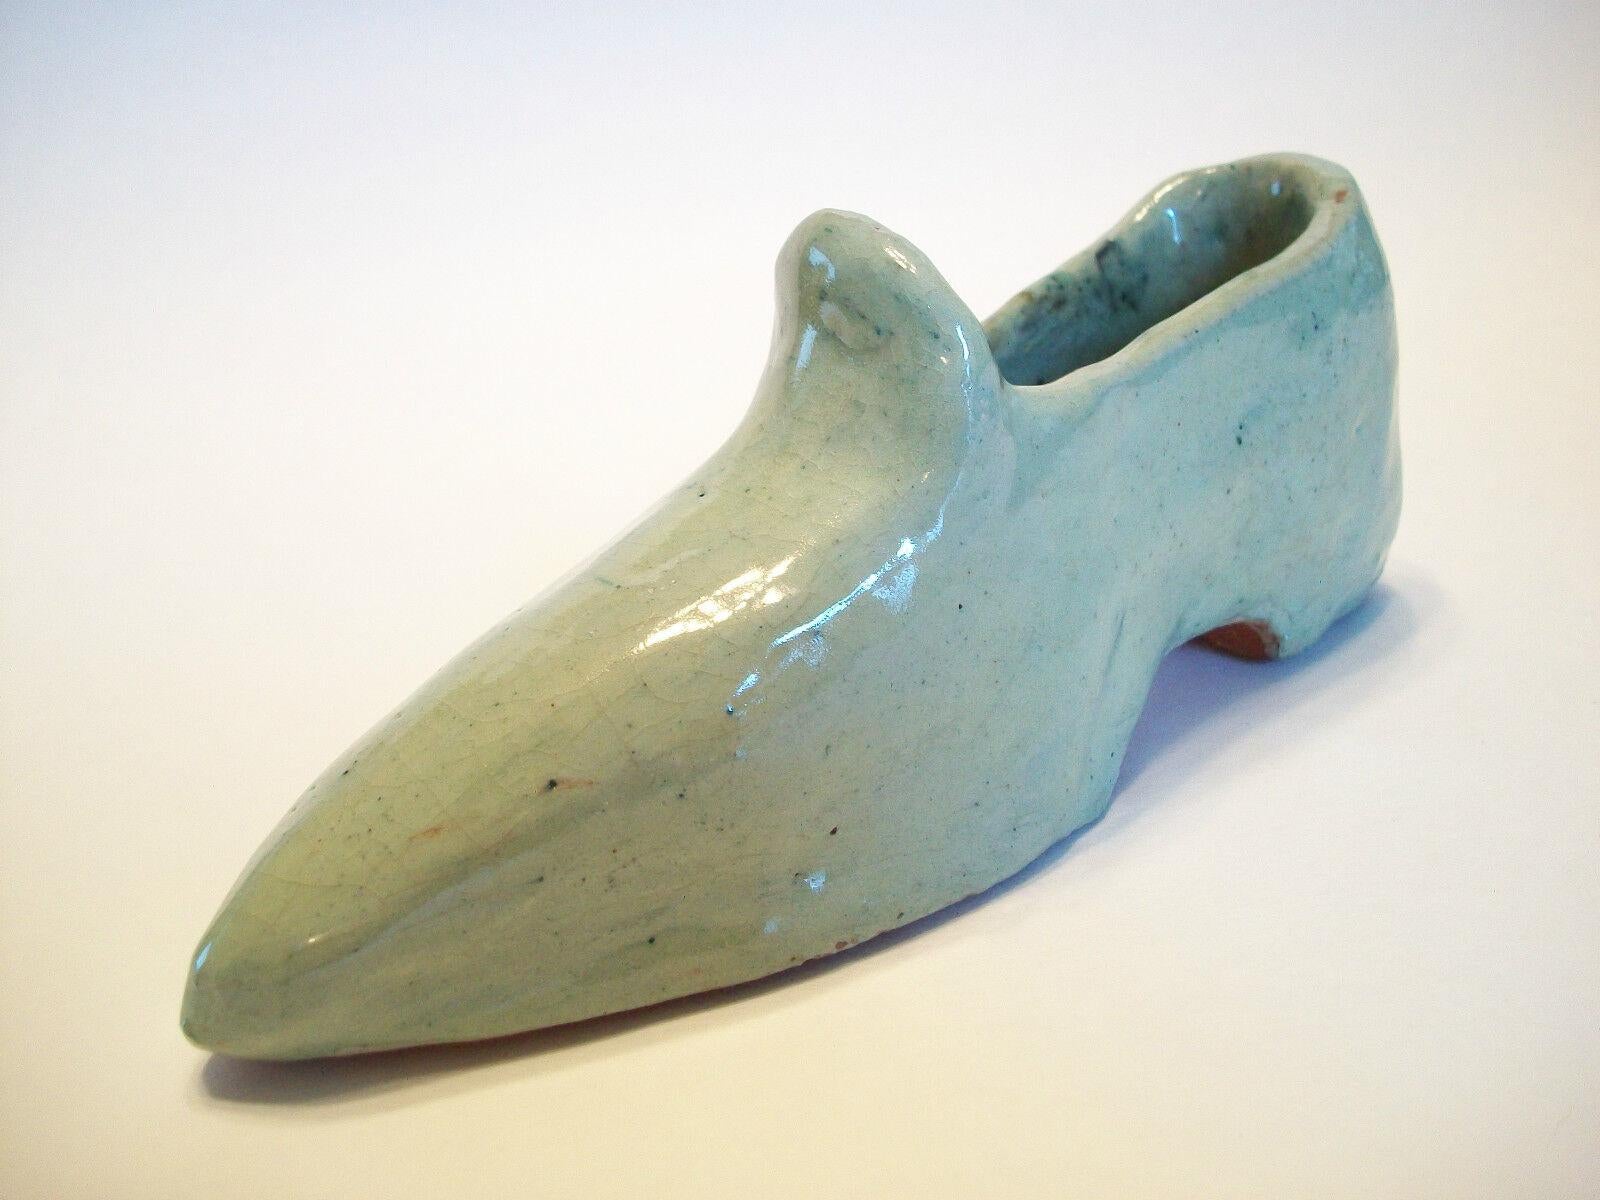 Vintage American folk art glazed terracotta shoe - hand modeled - signed and dated on the base - United States - circa 1966.

Good vintage condition - hand modeled body as intended by the artist - one firing crack (not affecting the structural